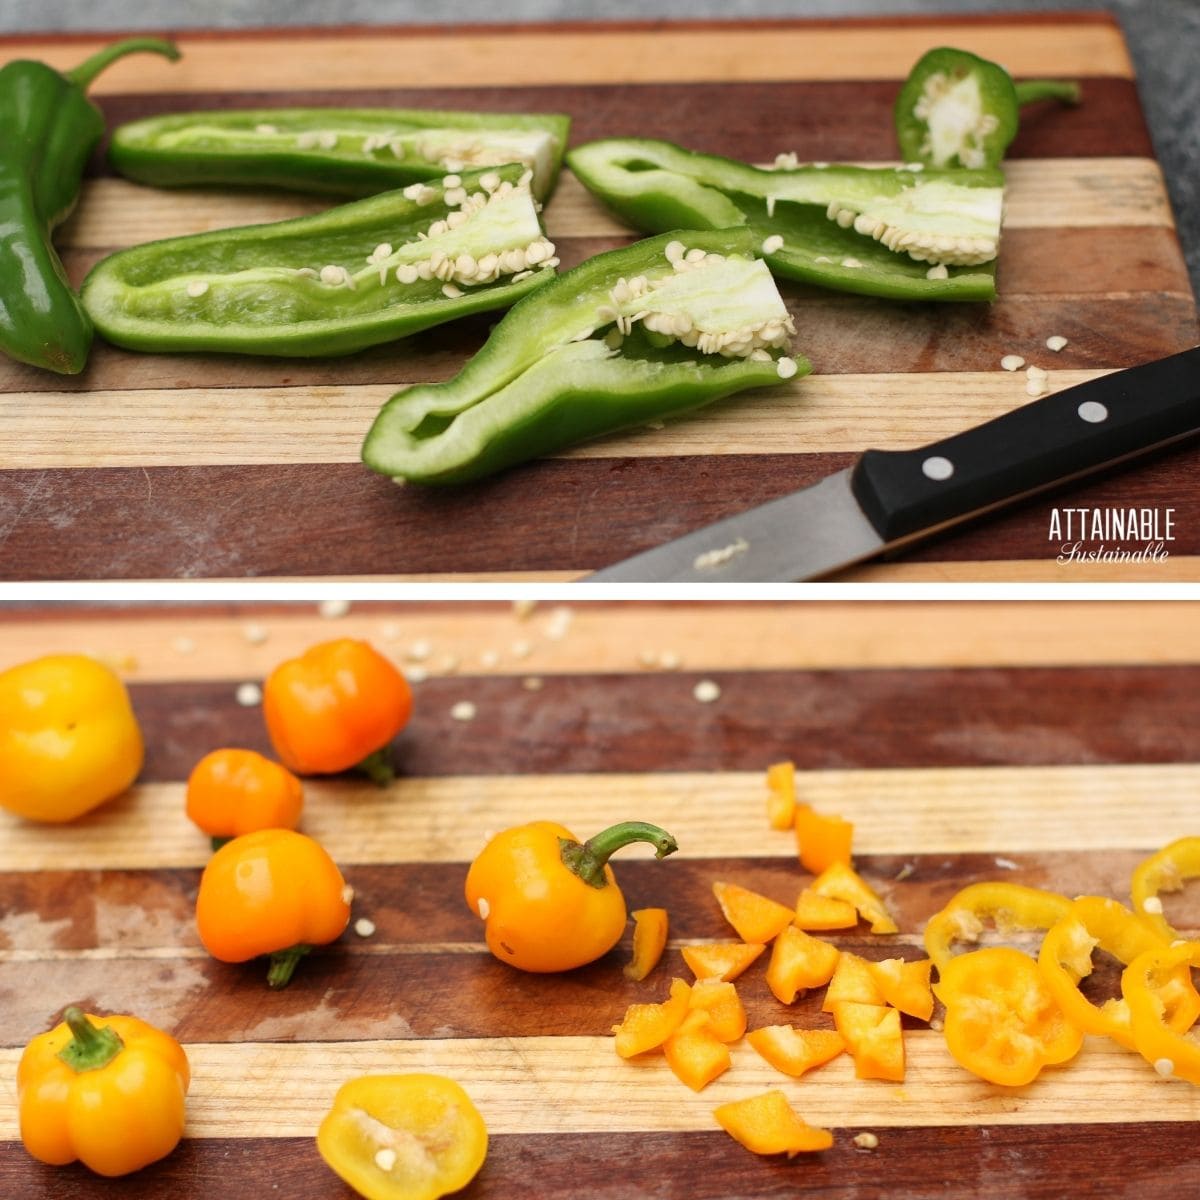 cutting and seeding peppers, both green and yellow.